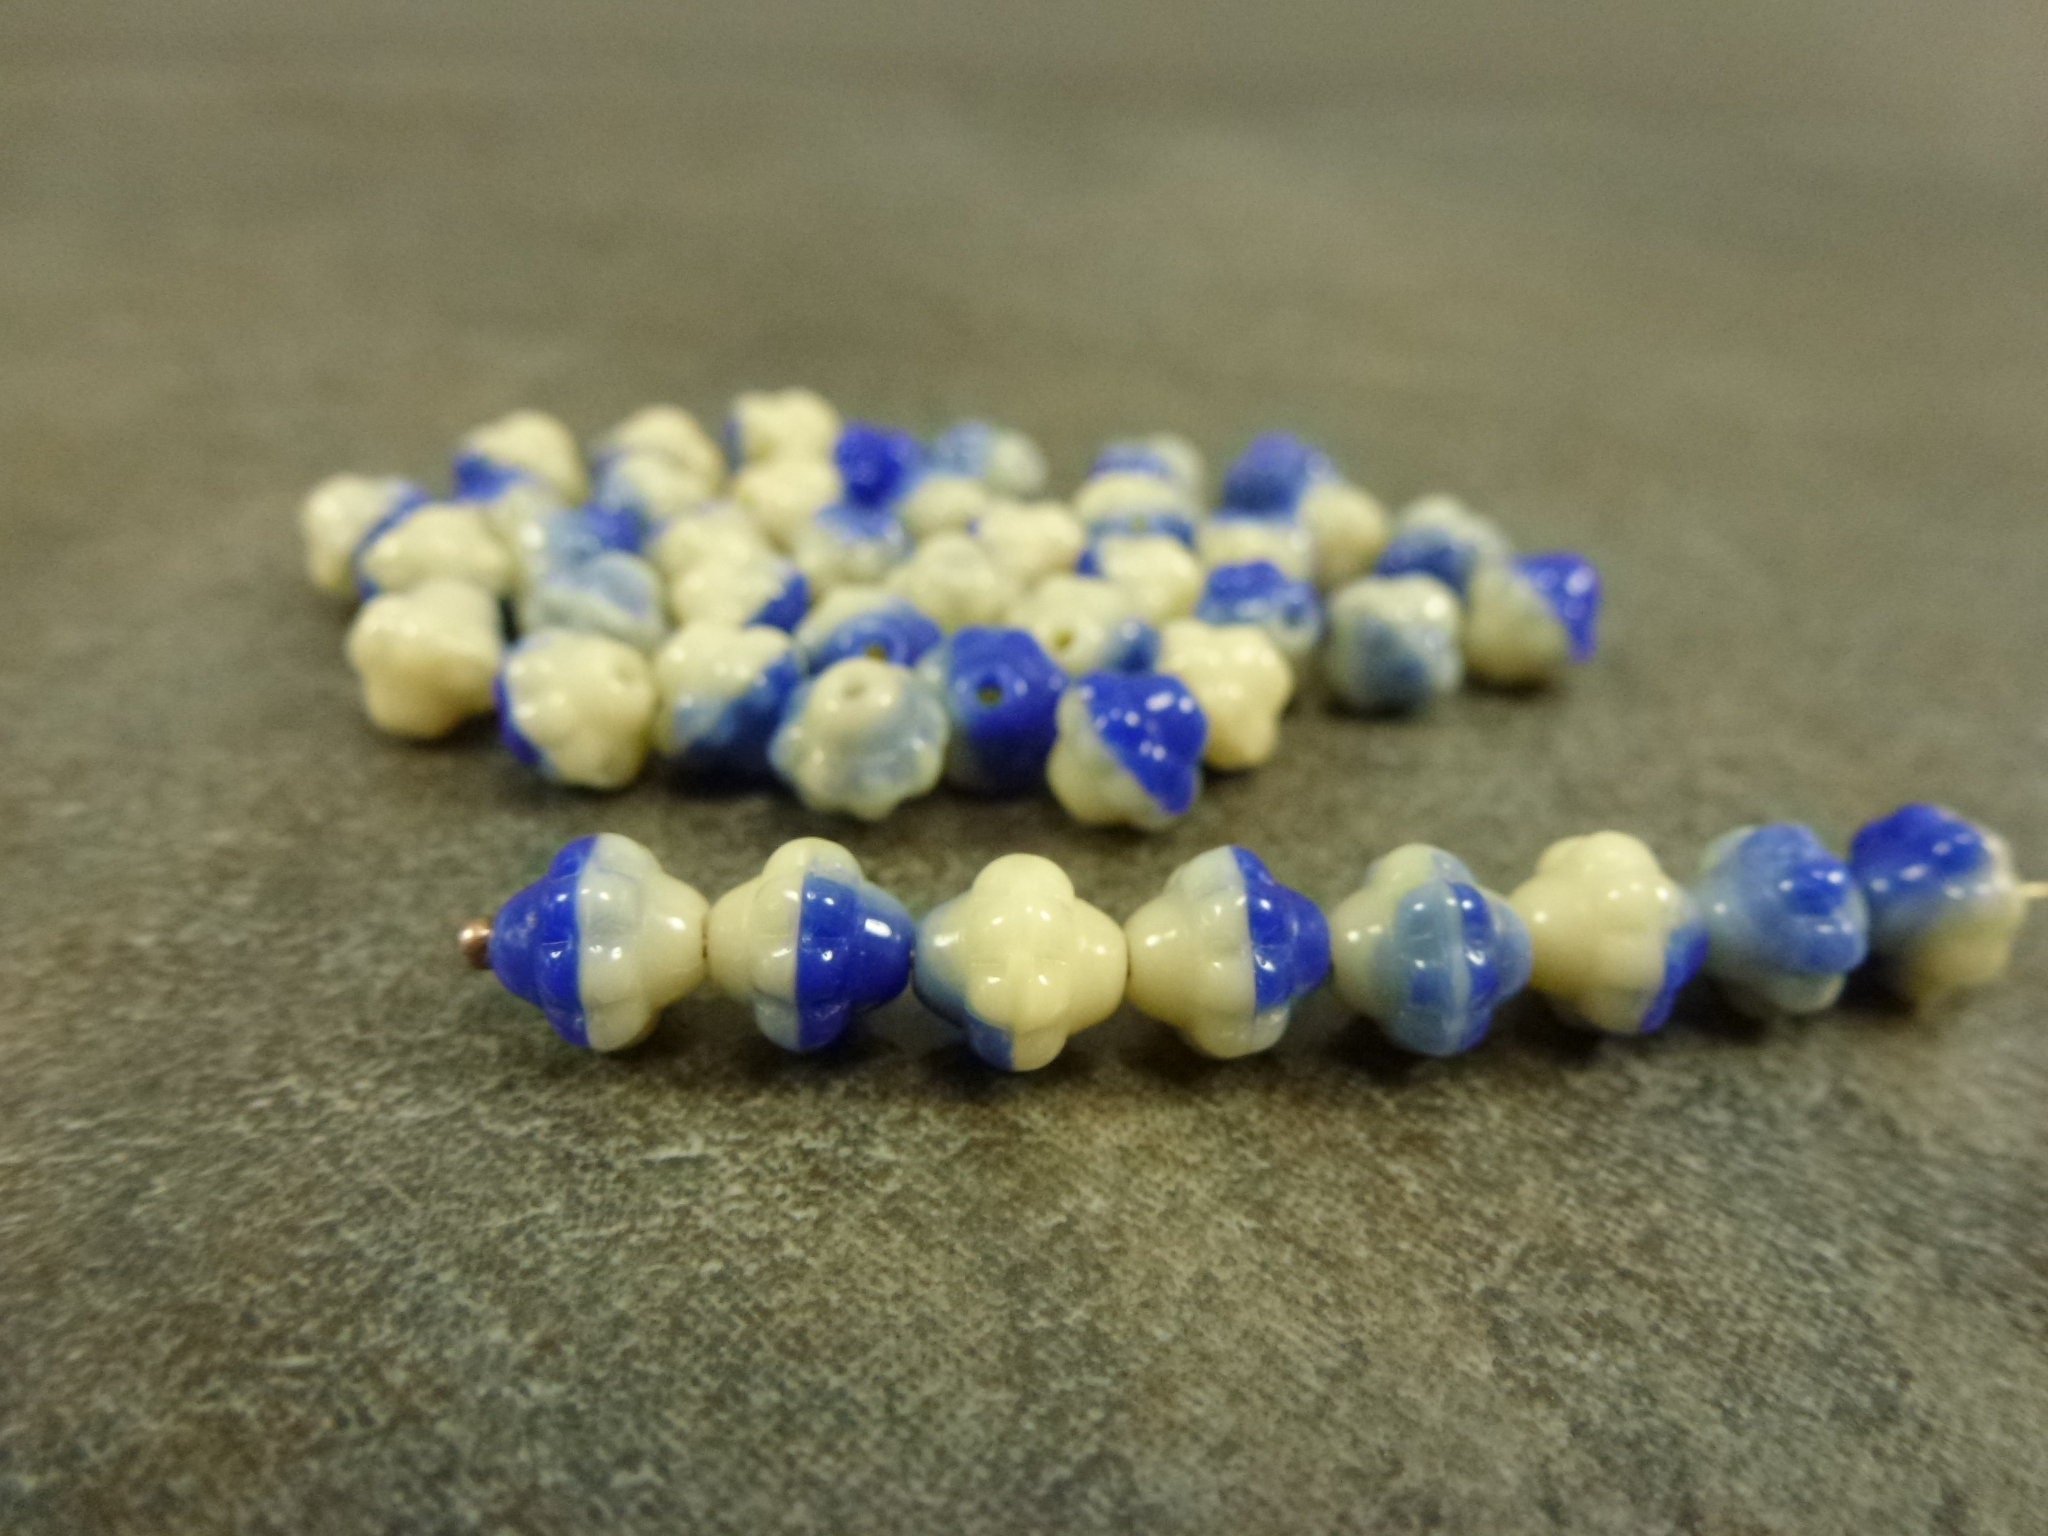 Cream & Blue Blend, Czech Glass Turbine Beads, 6mm, 50Pc, Etched Pressed Mulberry Saucer Rondelle